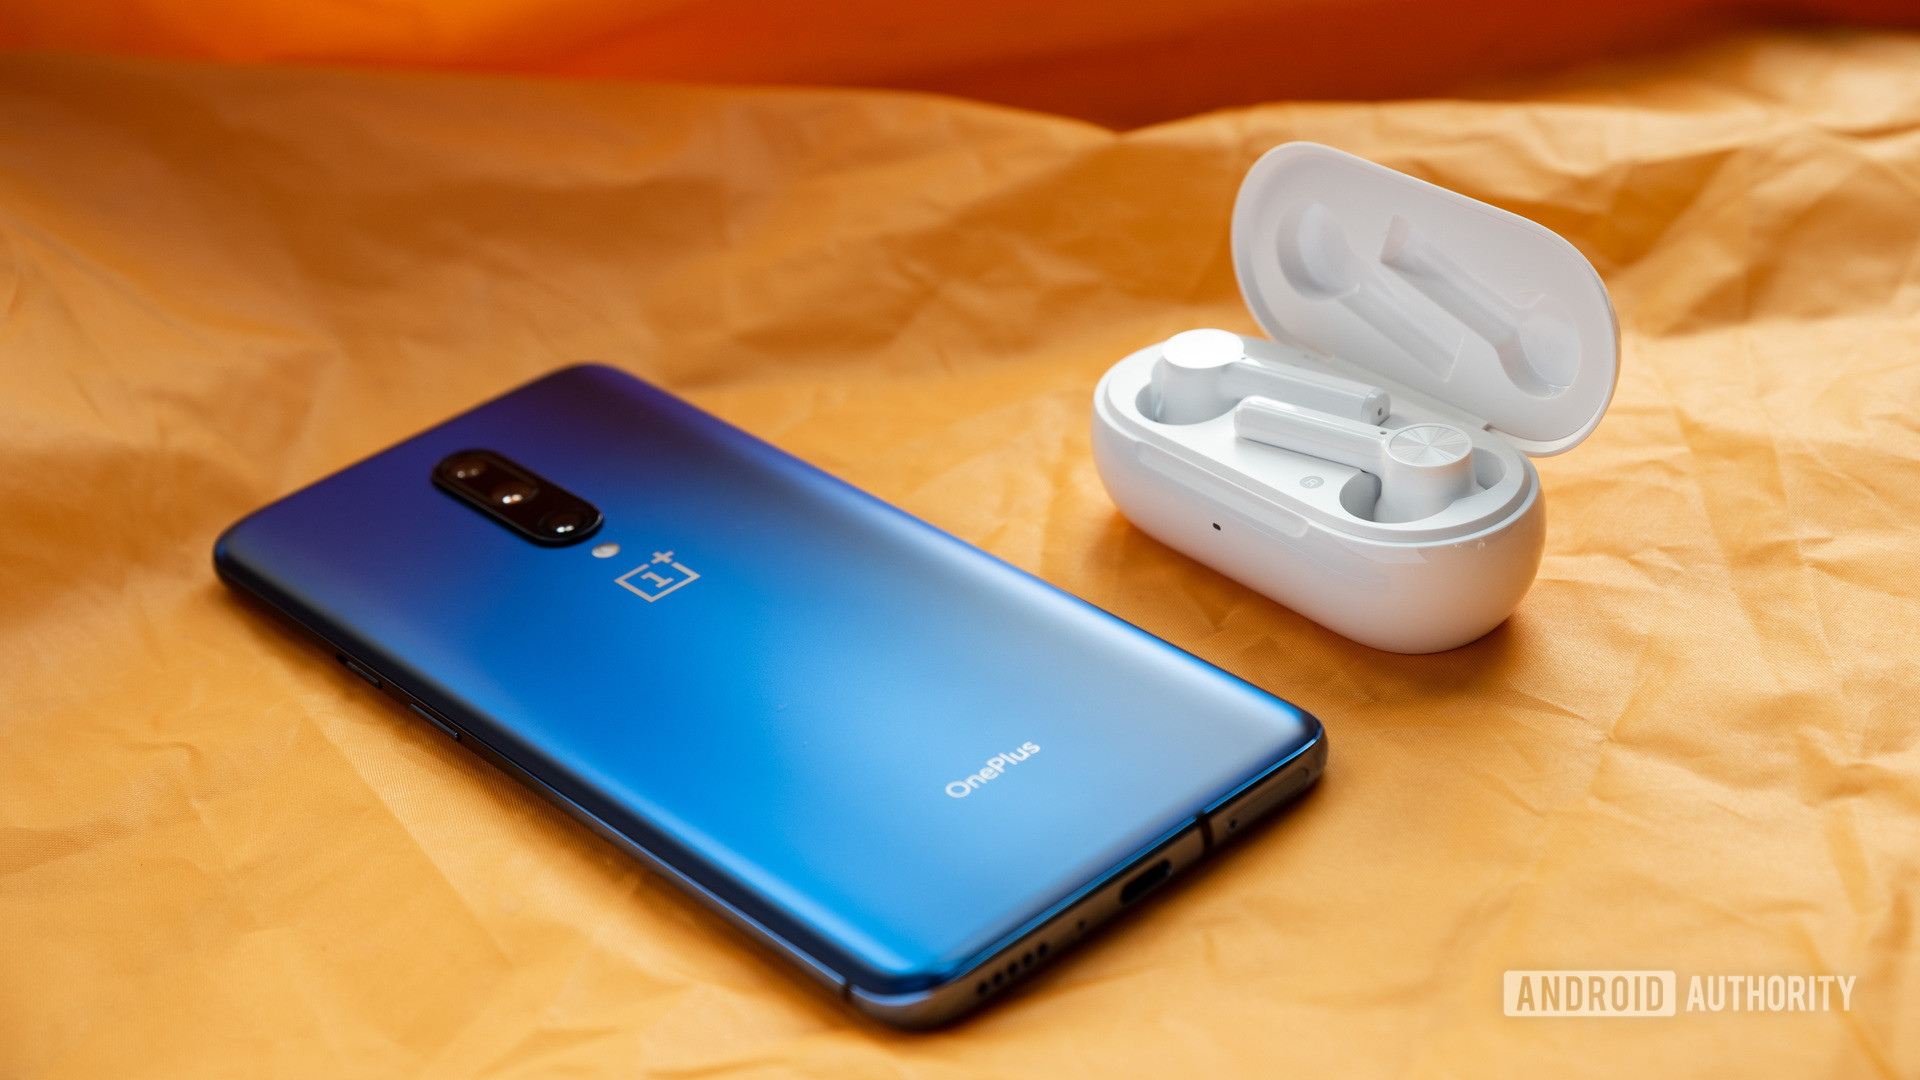 The OnePlus Buds Z cheap true wireless earbuds in the open charging case next to a OnePlus 7 Pro smartphone in blue.